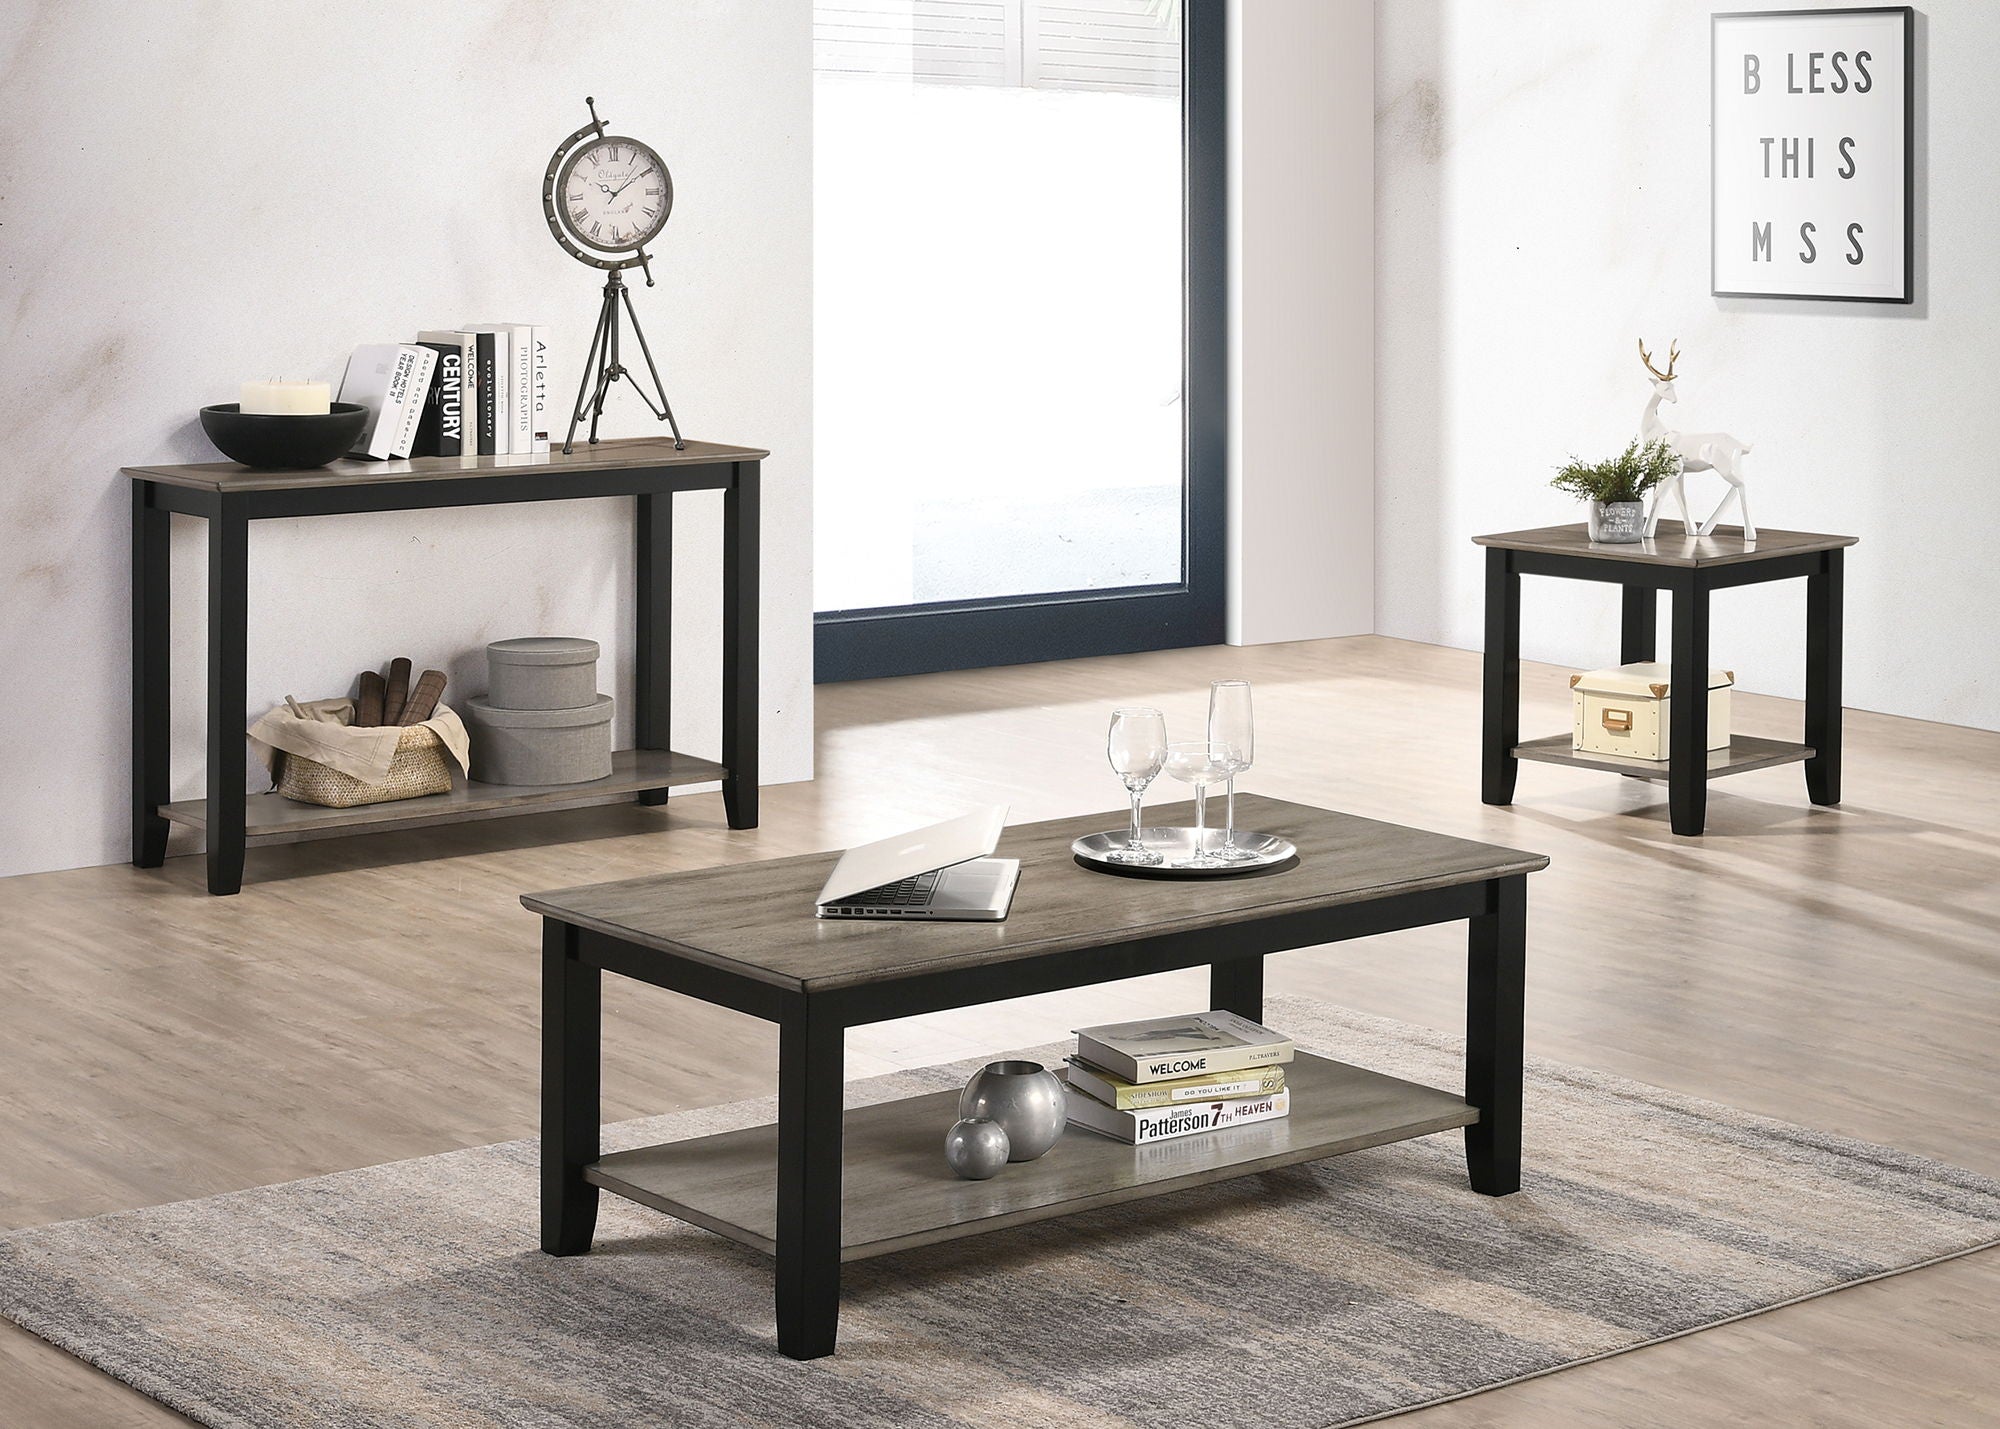 End Table With Open Shelf In Dark Brown And Gray